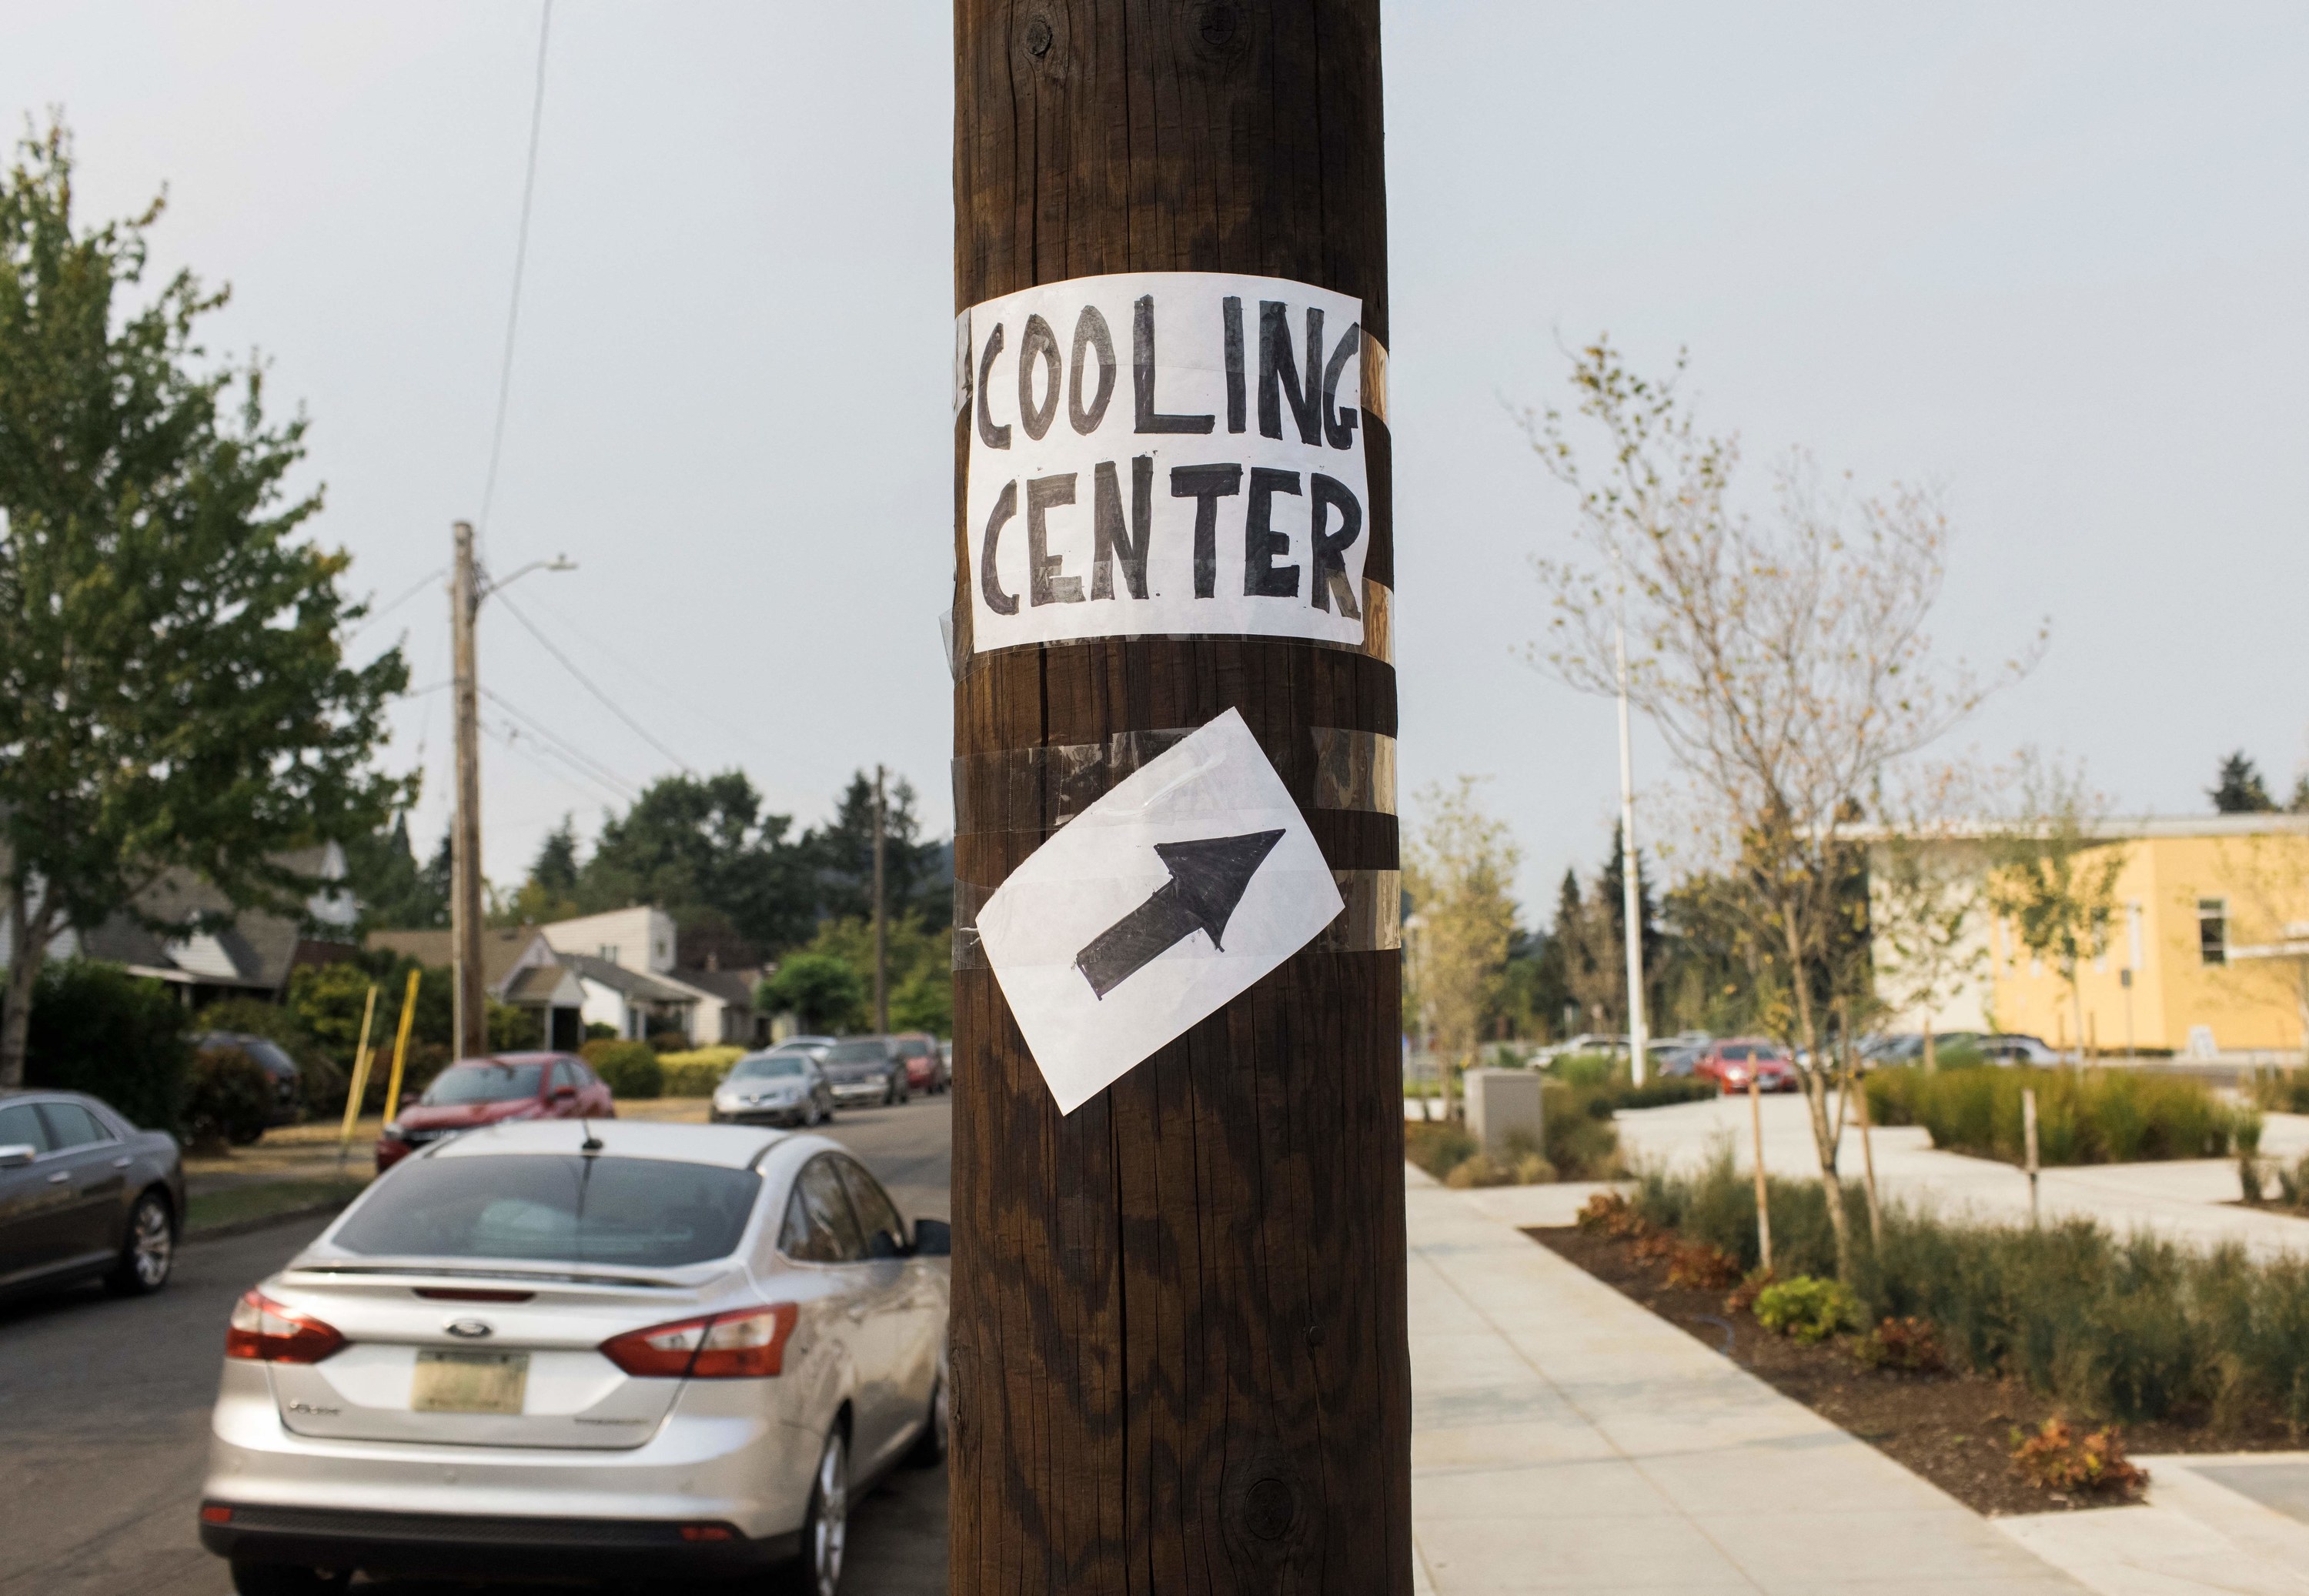 A street sign on a pole with an arrow pointing to a &quot;Cooling Center&quot;